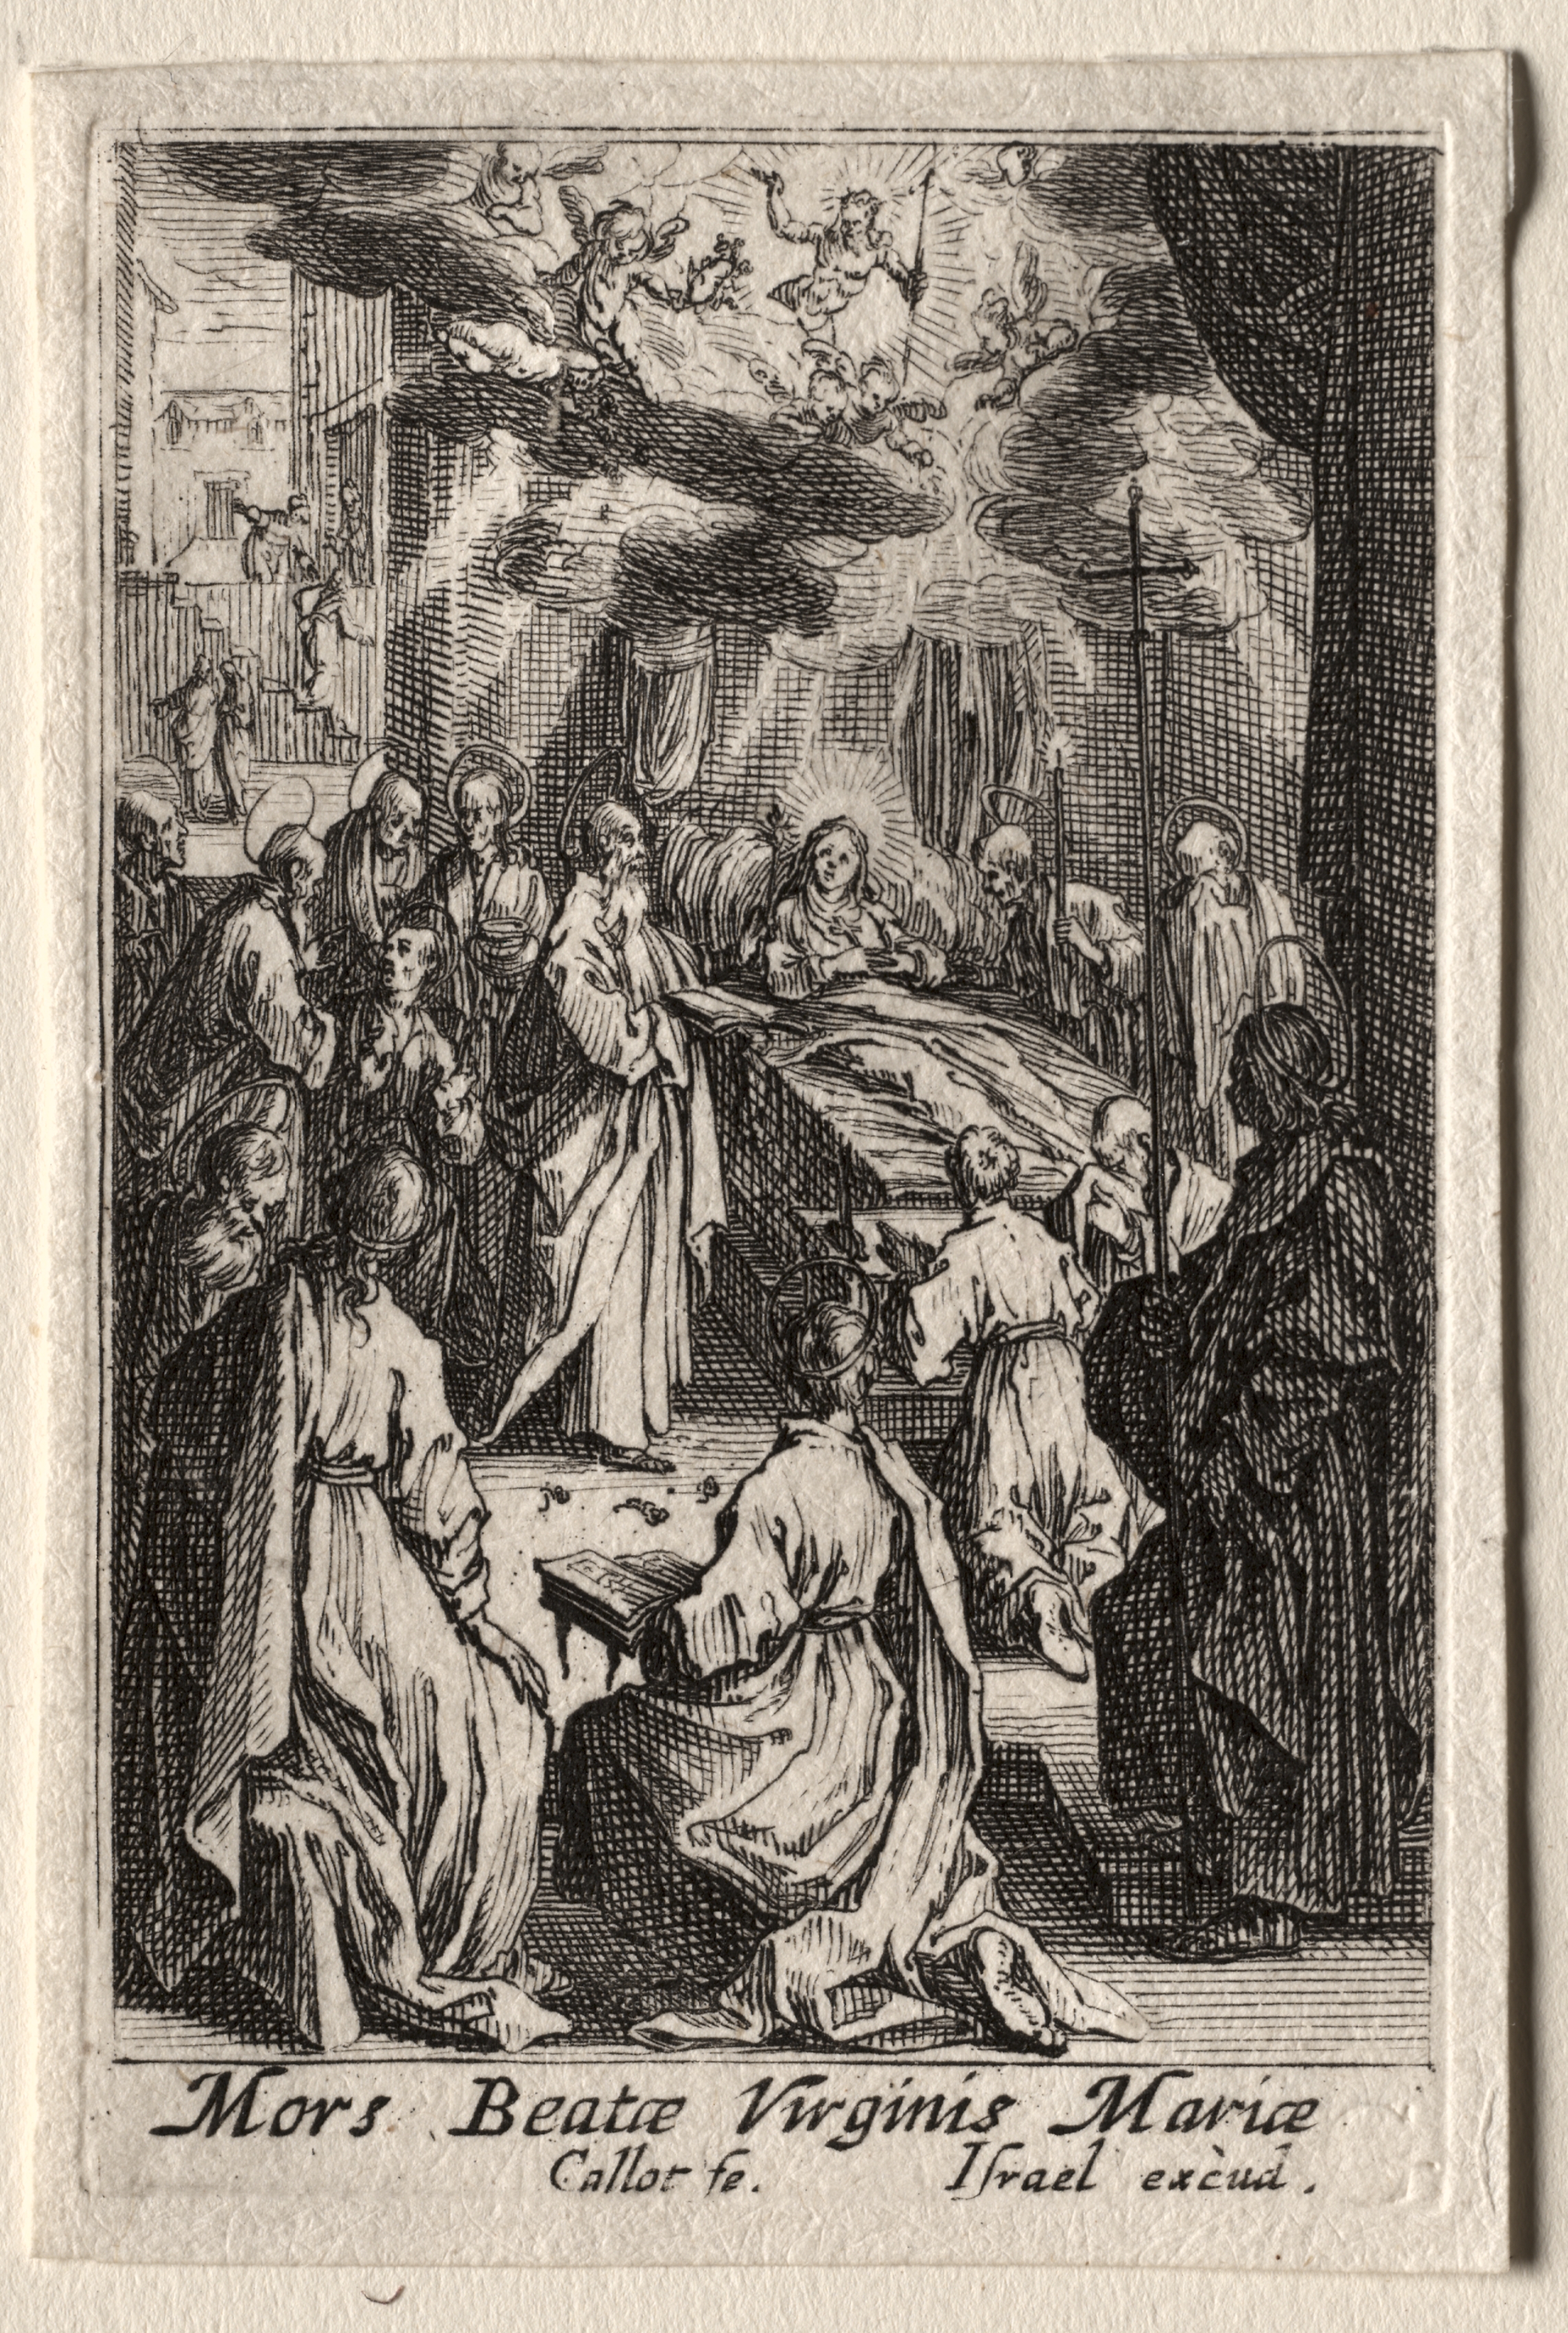 The Life of the Virgin:  The Death of the Virgin